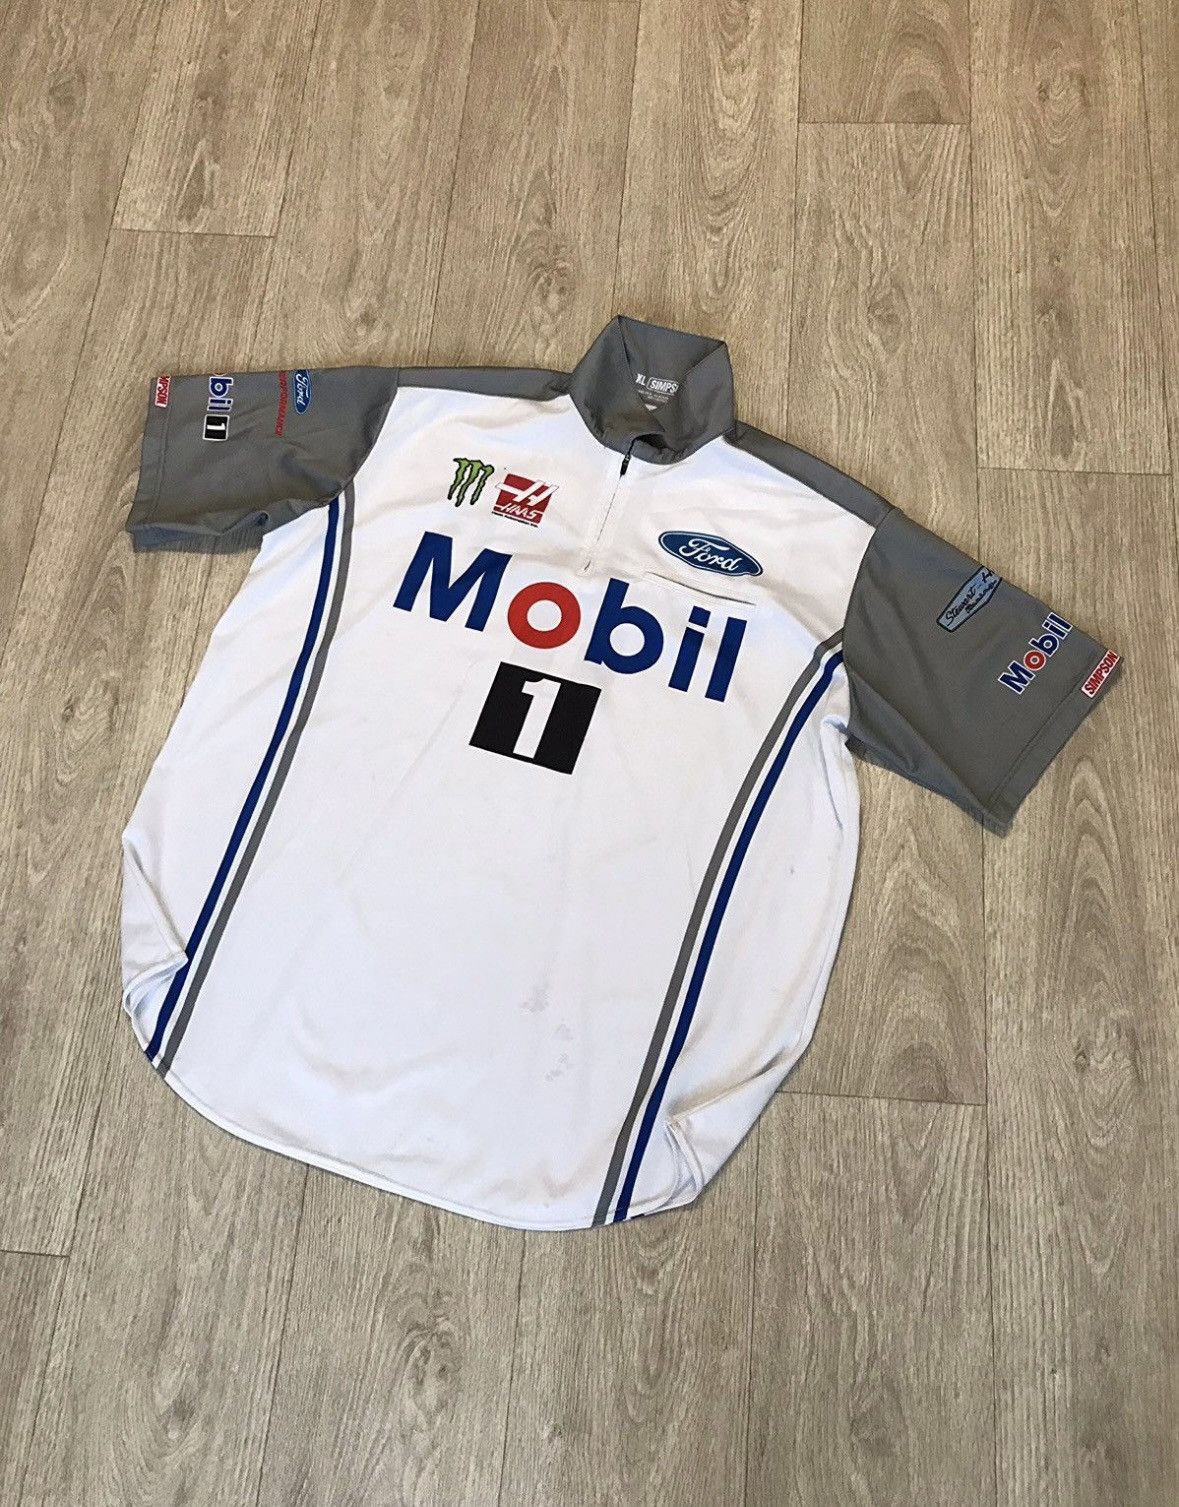 Pre-owned Ford X Racing Vintage Stewart-haas Racing Mobil1 Ford Jersey Nascar In White